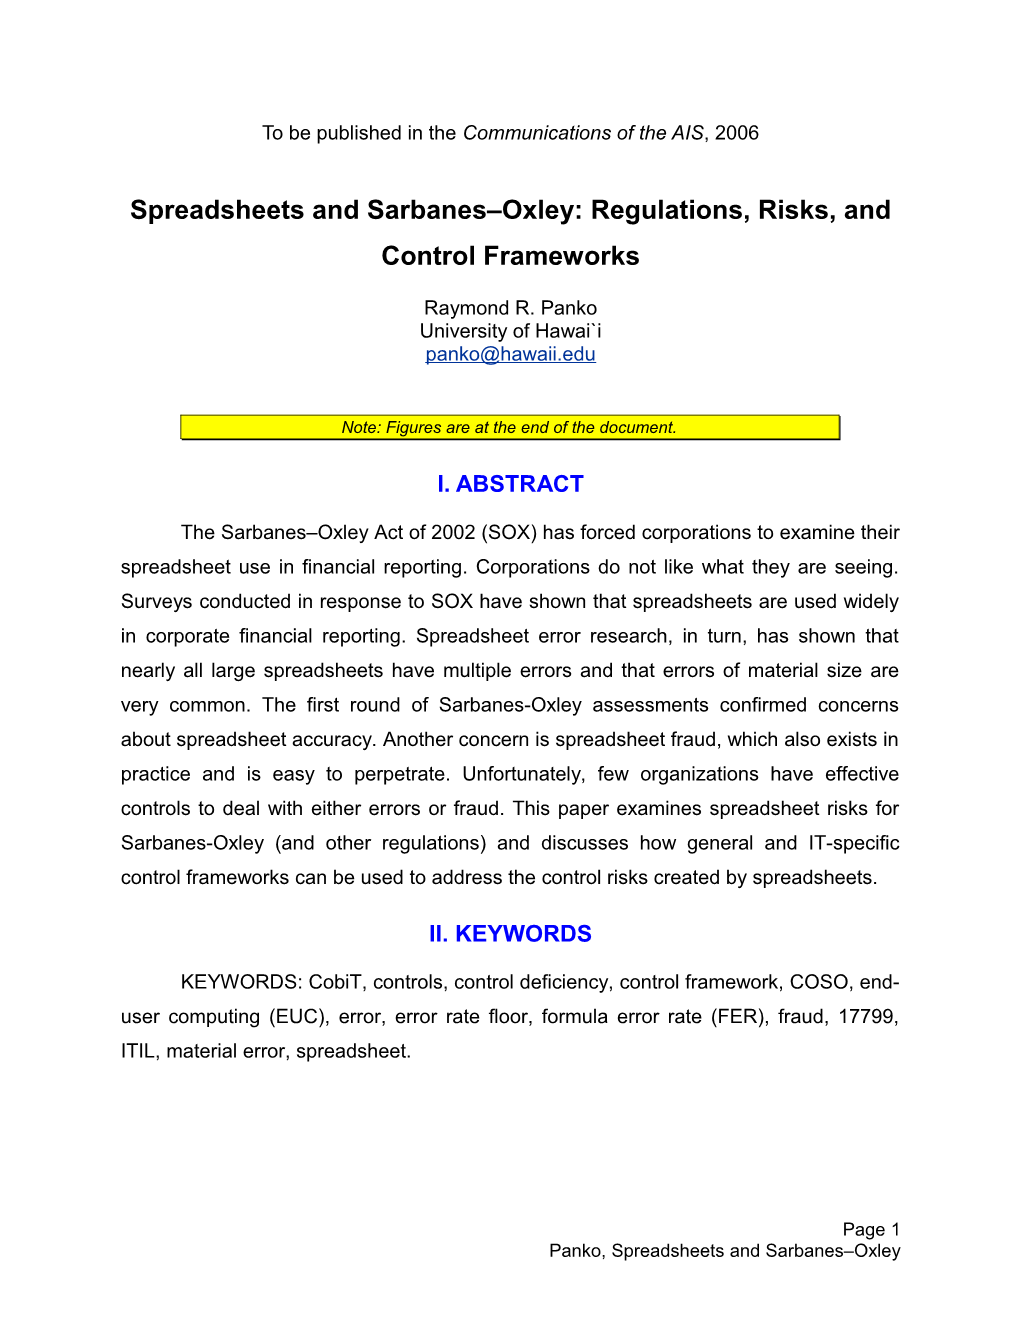 Spreadsheets and Sarbanes Oxley: Regulations, Risks, and Control Frameworks